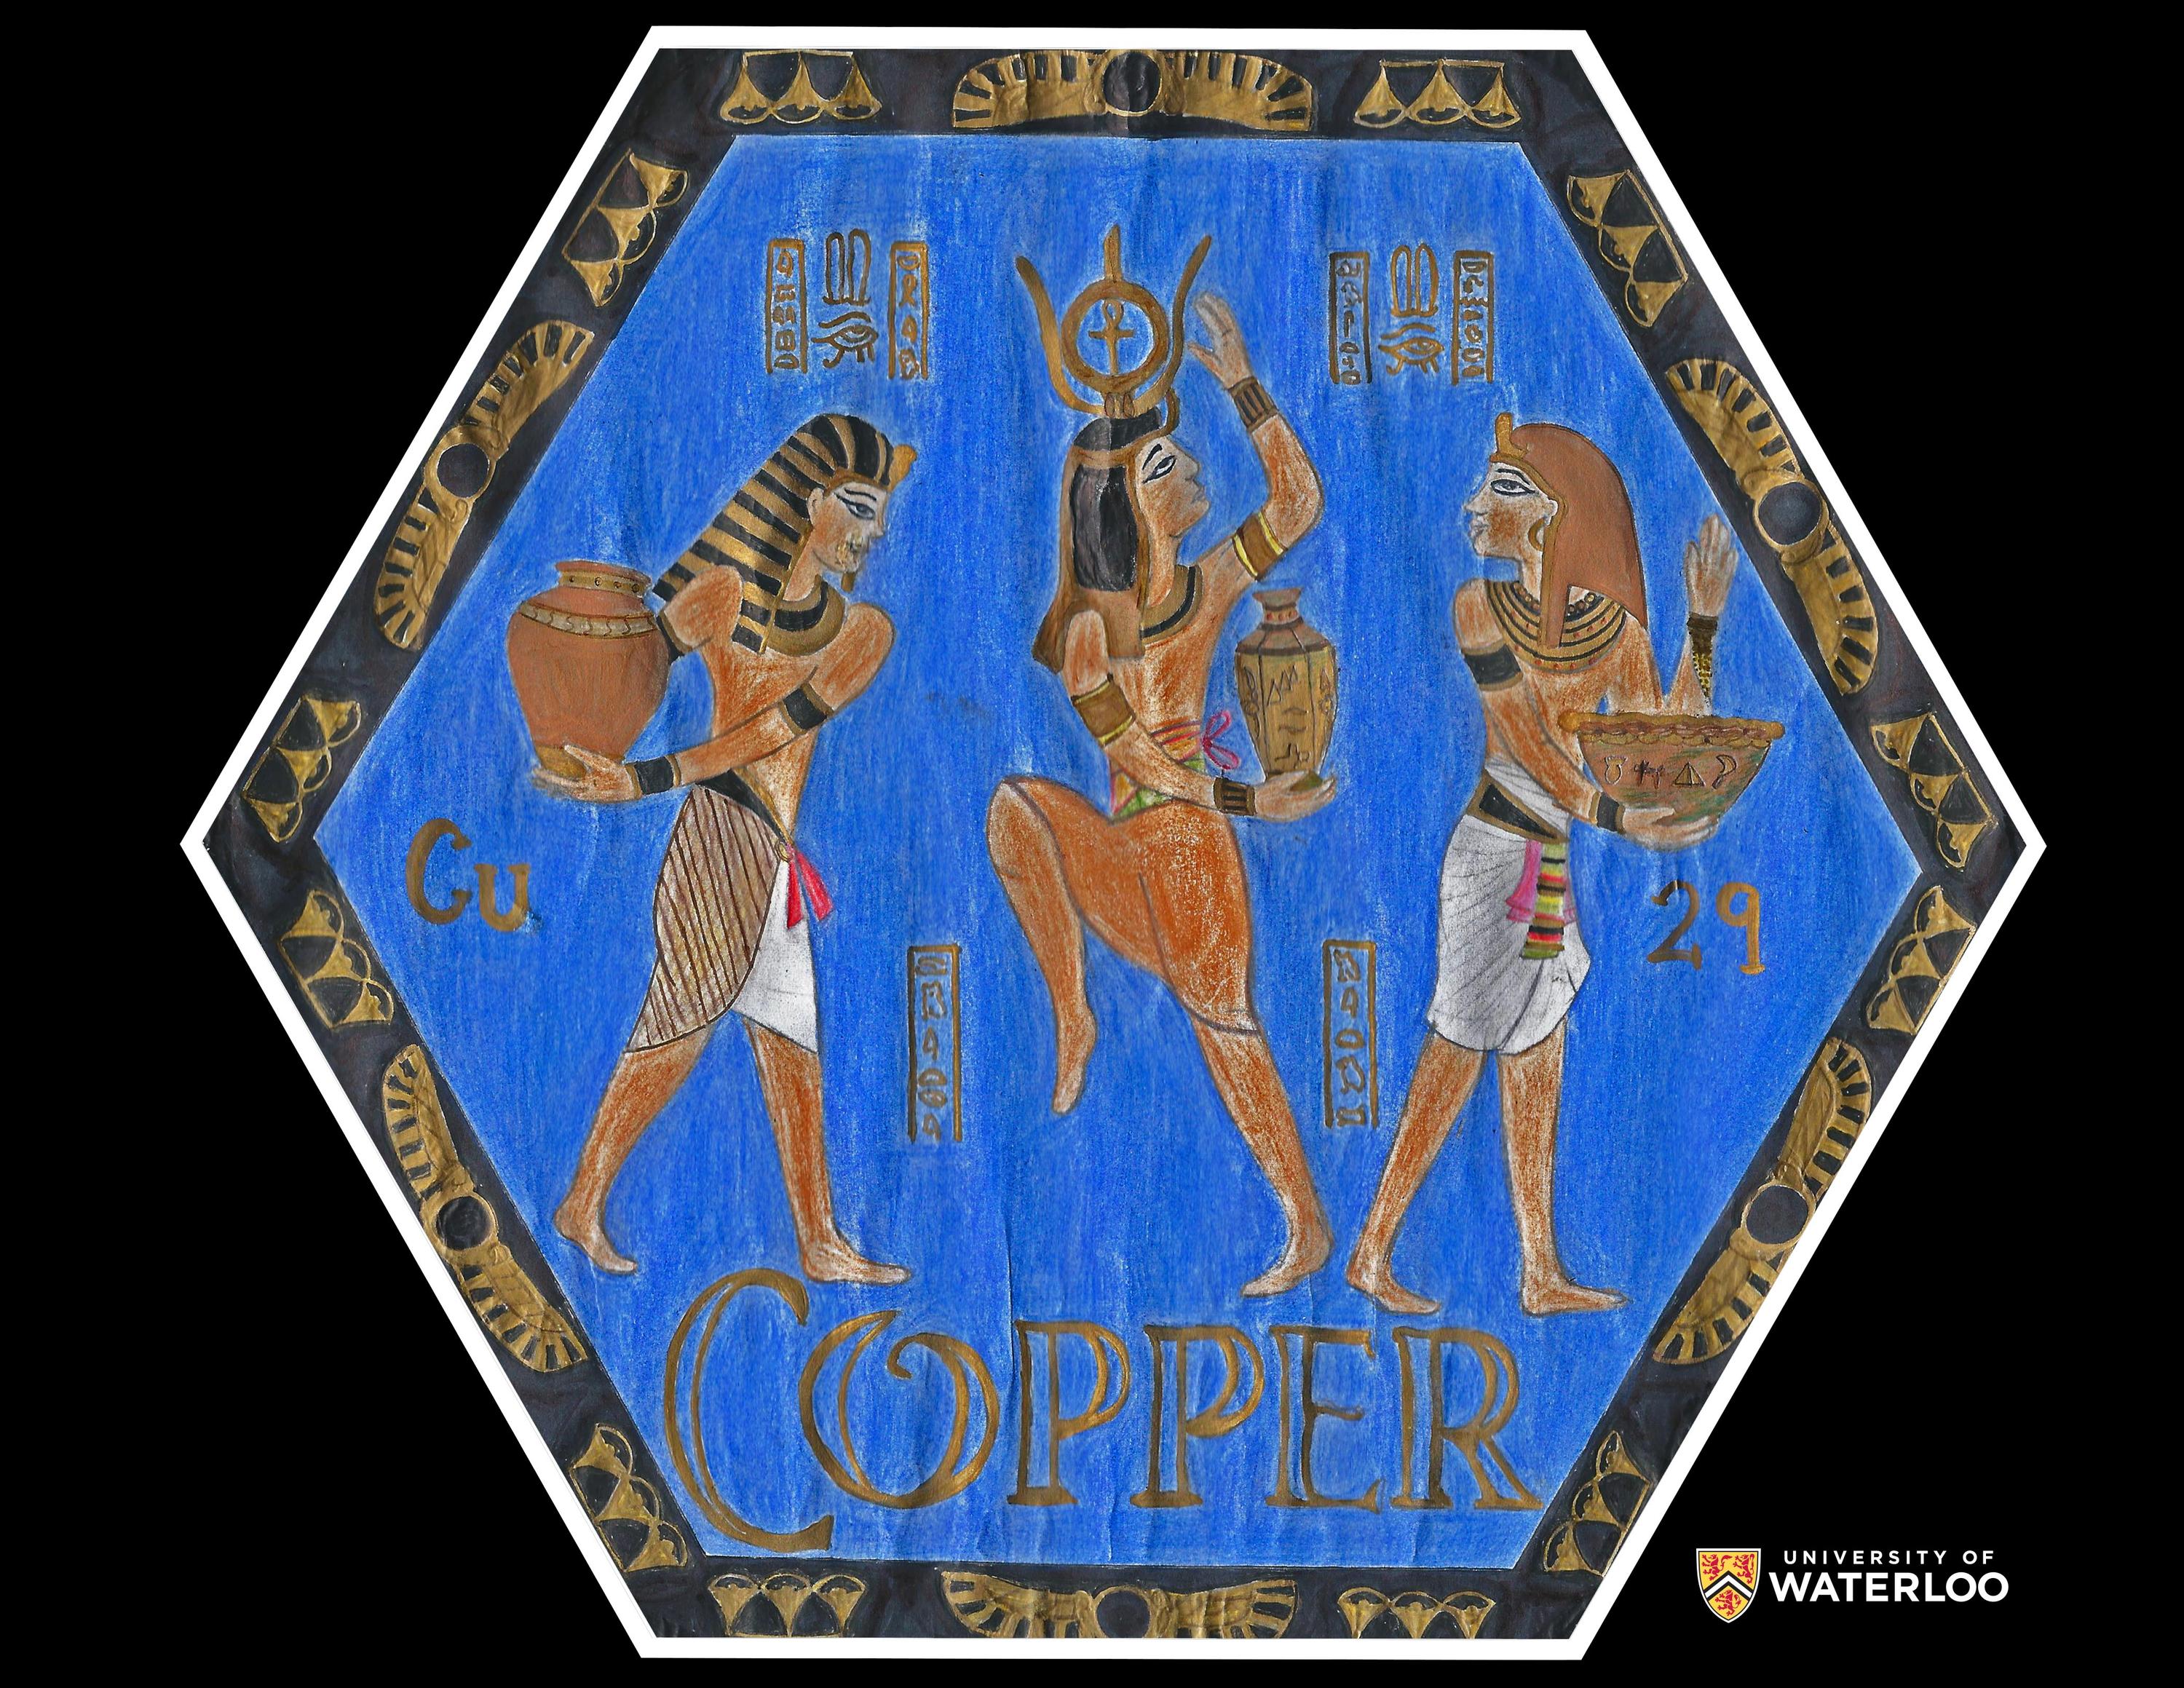 Layered collage with pencil and ink illustrations. Blue background made with blue copper (II) sulphate. Three Egyptian figures standing centre. Their jewelry and head crowns are made of copper. Black border includes copper-coloured hieroglyphs of words describing copper and the periodic table. Bottom is the word “Copper” with the chemical symbol “Cu”left and atomic number “29” right.